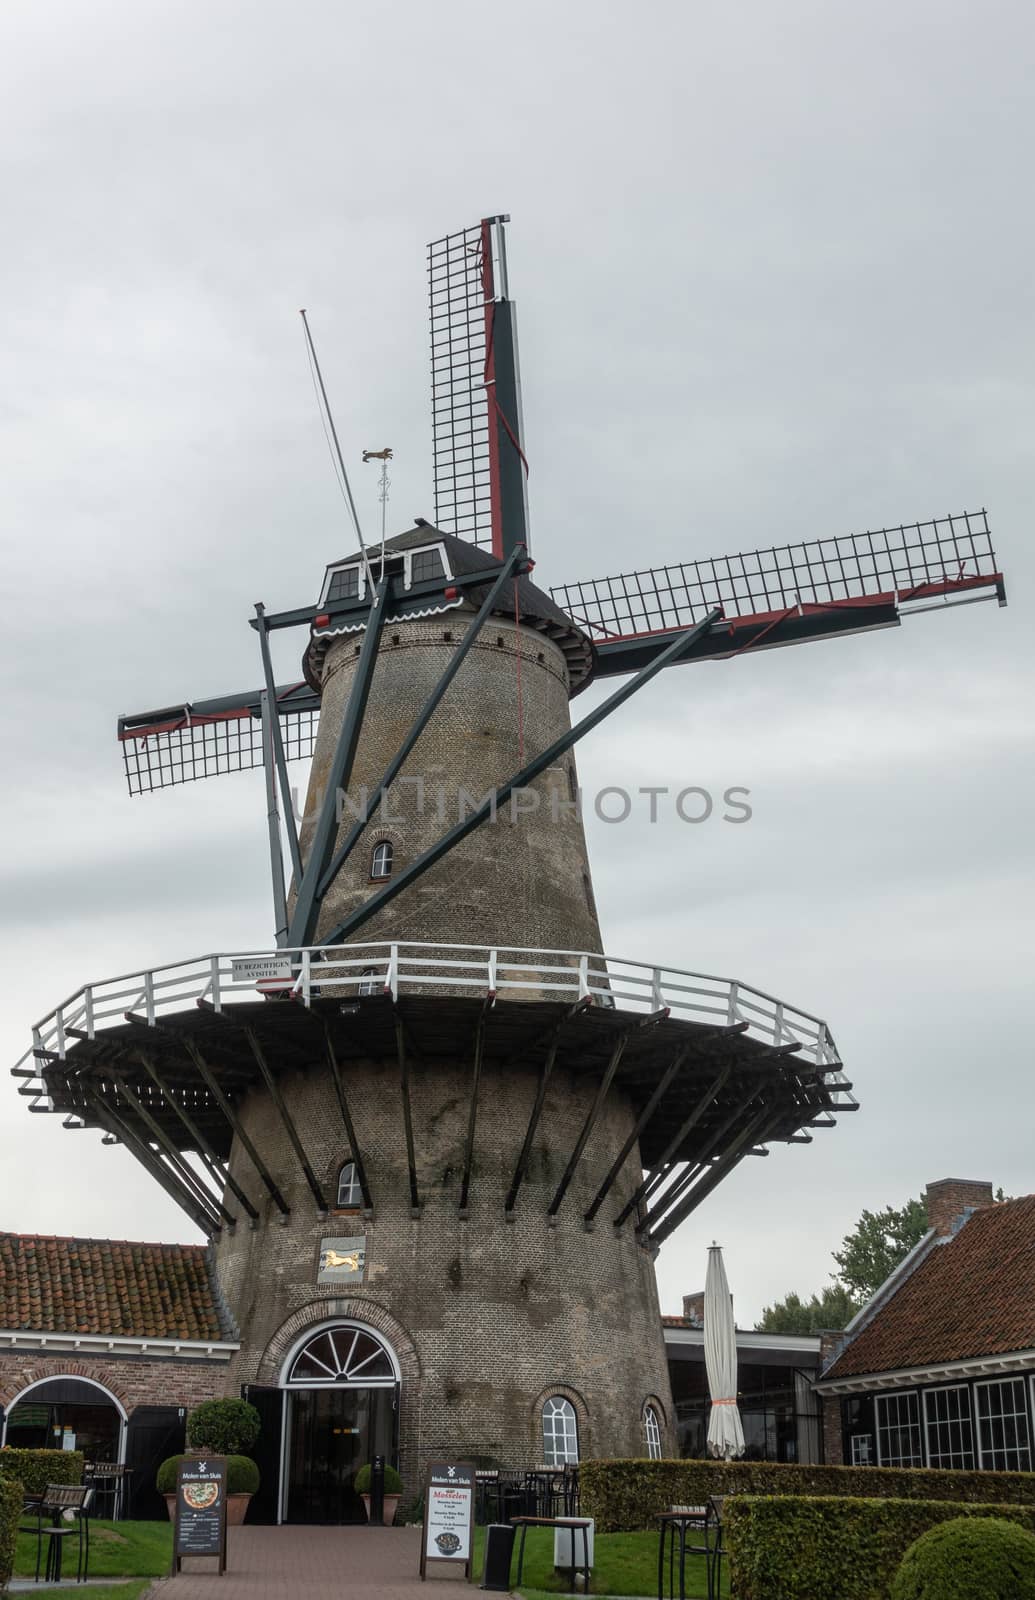 Sluis, Zeeland, Netherlands - September 22, 2018: The windmill of Sluis, gray brick structure with wooden circular walkway against silver sky is a restaurant, tearoom and pub. Some green vegetation.